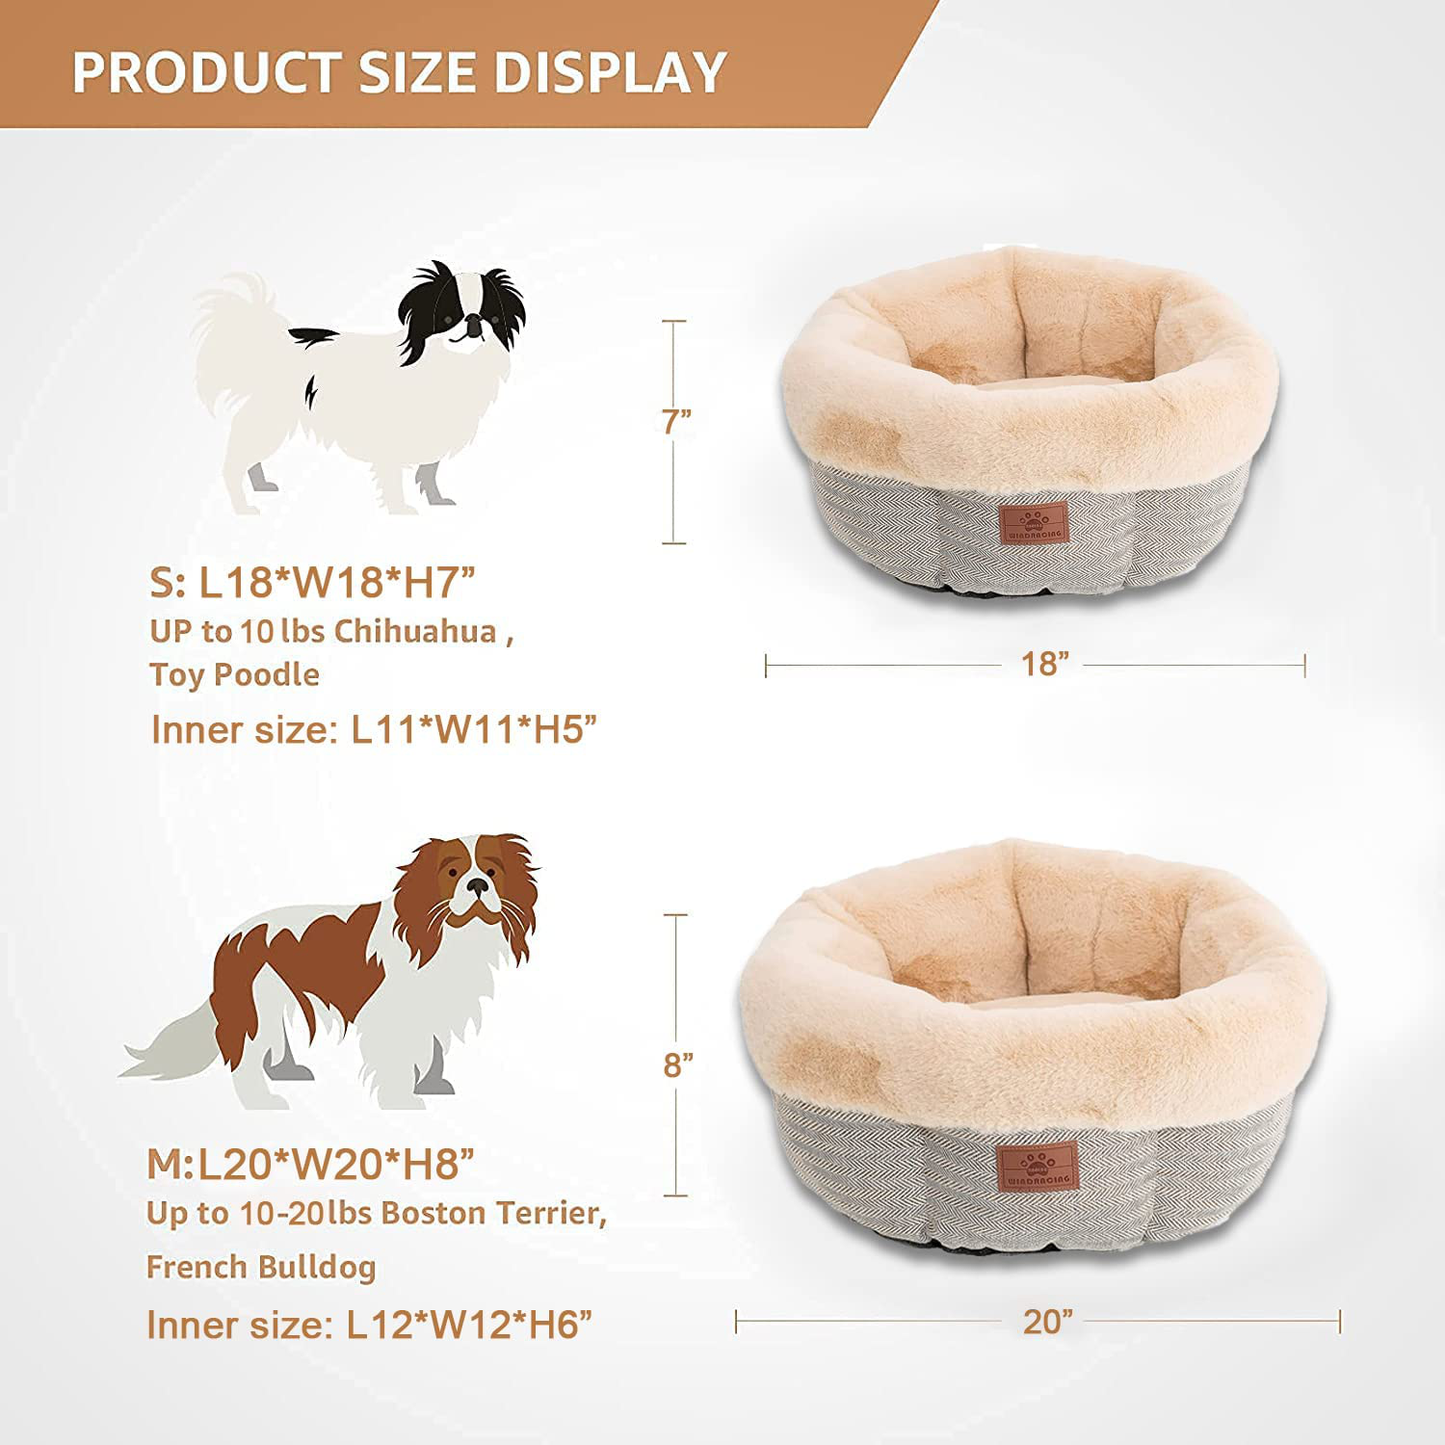 Cat Beds for Indoor Cats,Small Dog Bed,Cuddler Dog Beds,Calming Dog Bed Donut,Soft Anxiety Cozy Pet Beds,Puppy Bed for Small/Medium Dogs Washable round in Beige Color,Windracing PET